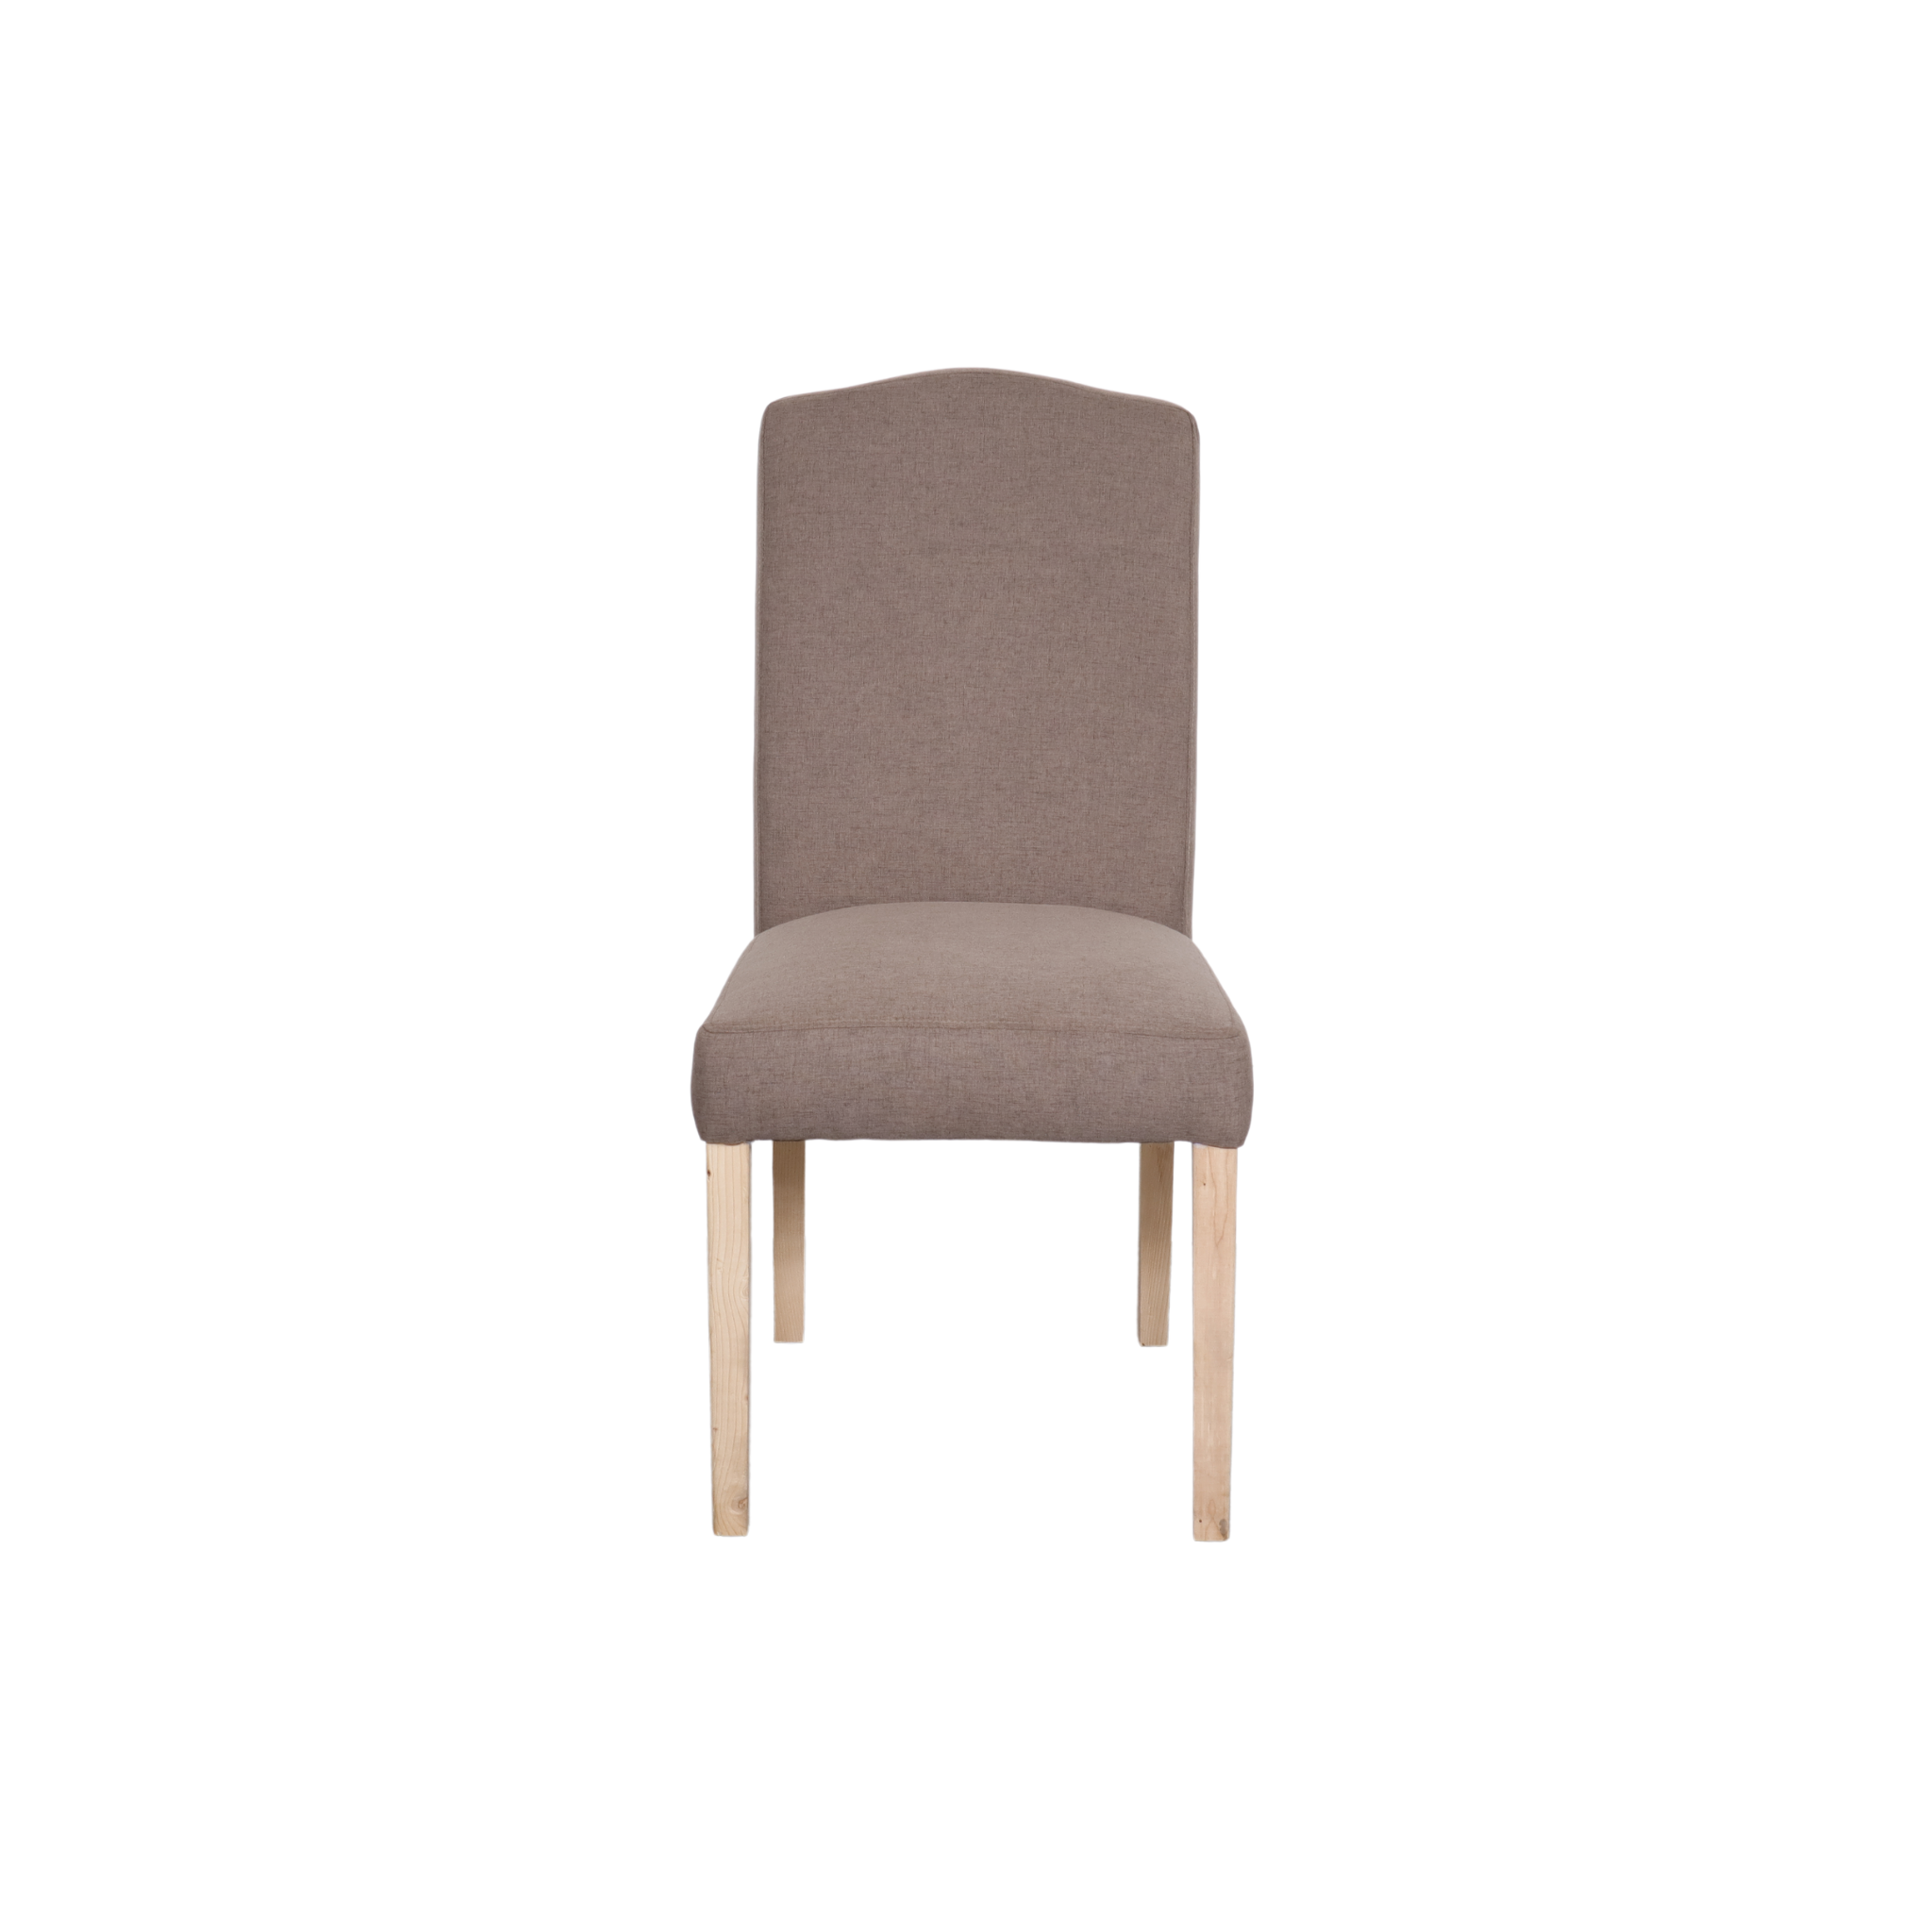 TERRY Solid Wood Dining Chair AF Home